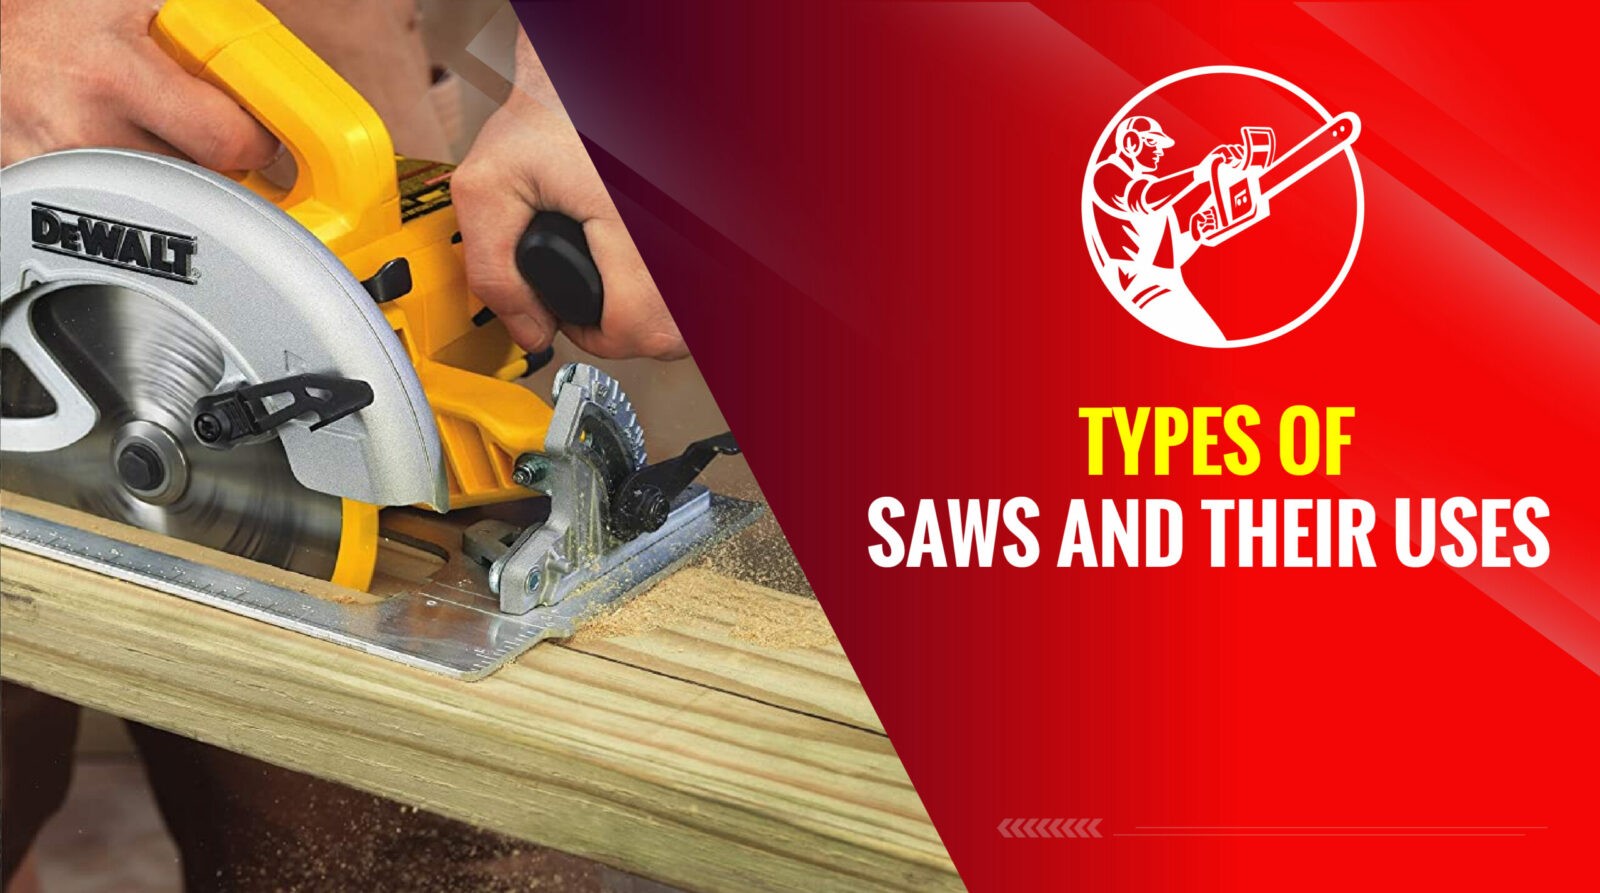 Types of Saws and Their Uses: A Tool Guide 2023